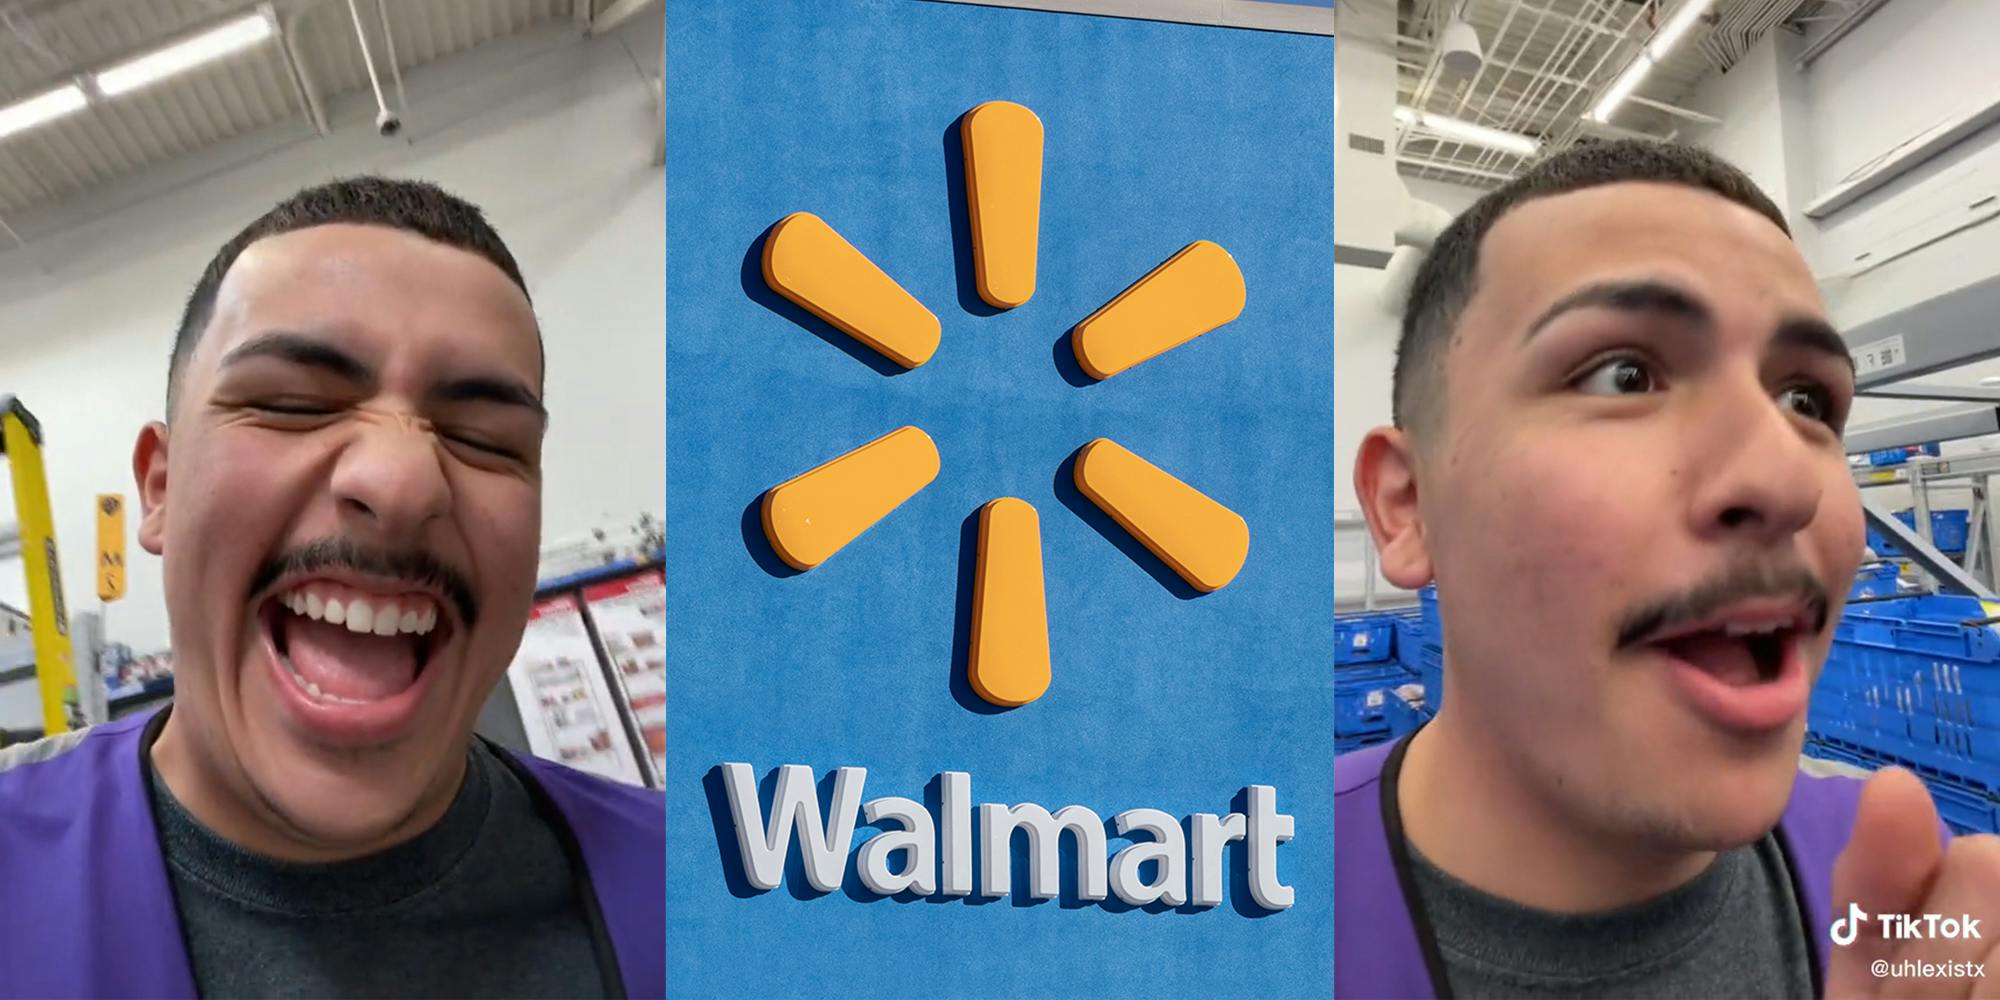 ‘That’s a blessing in disguise’: Walmart employee claims he was fired after accumulating ’22 points’